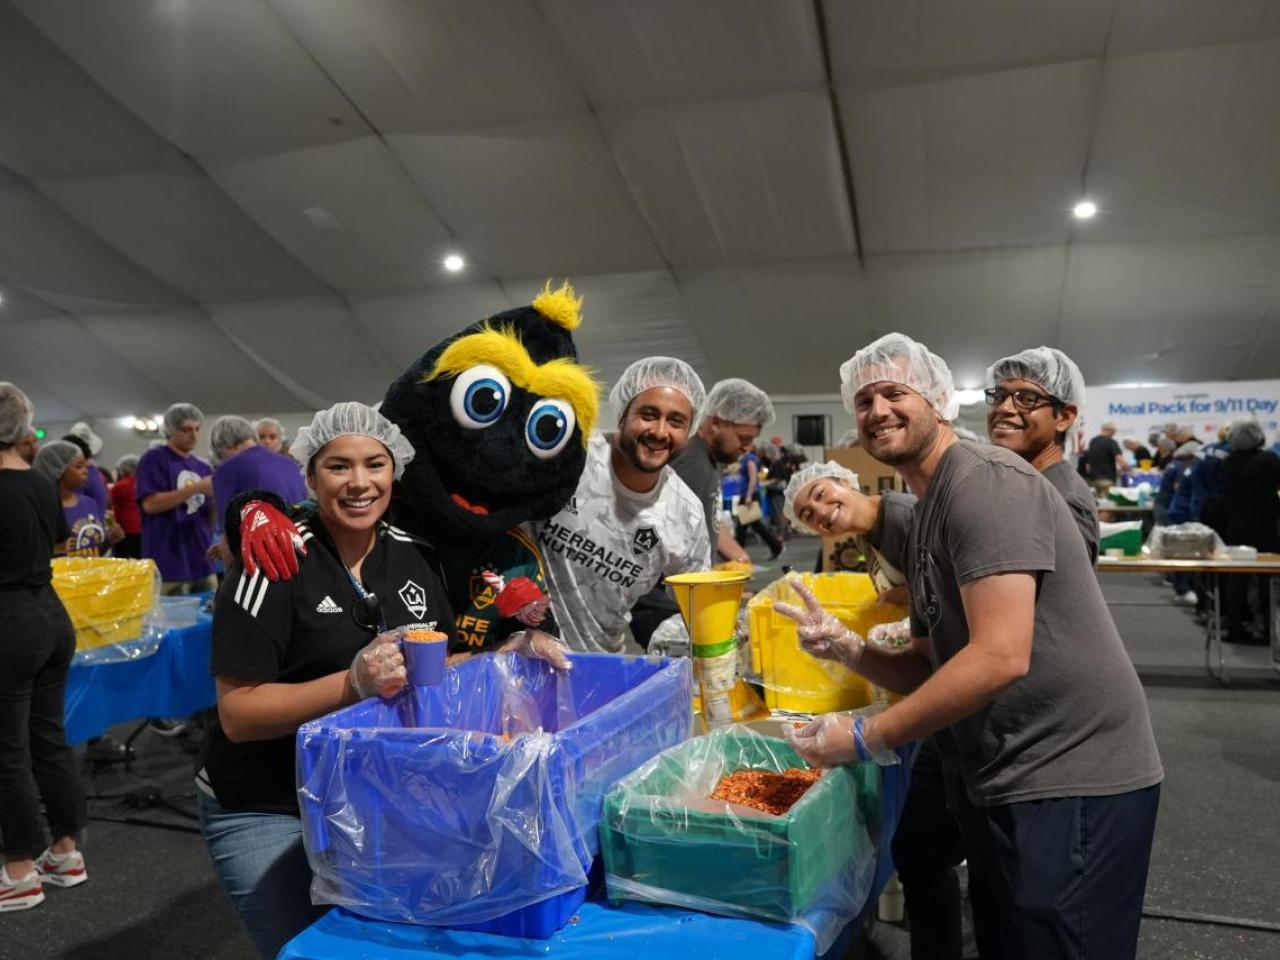 LA Galaxy's mascot Cozmo helps pack meals with volunteers from LA Galaxy.